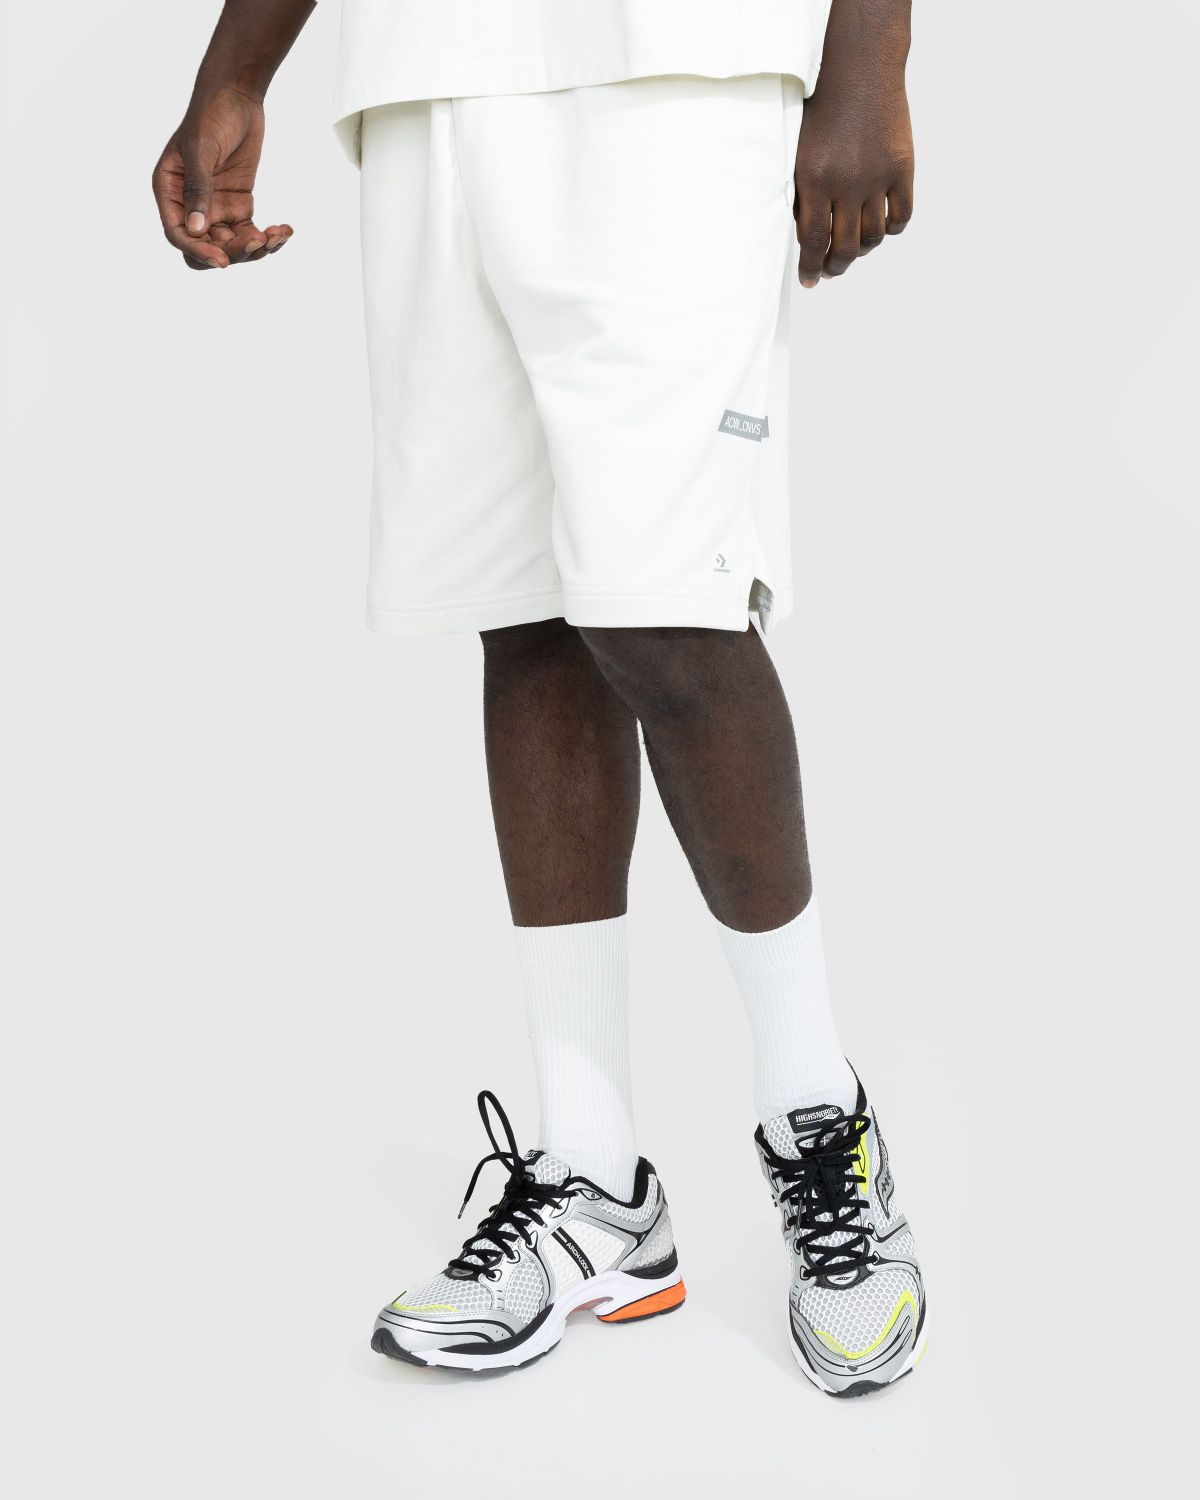 Converse x A-Cold-Wall* – Reflective Shorts Stone - Shorts - Beige - Image 2